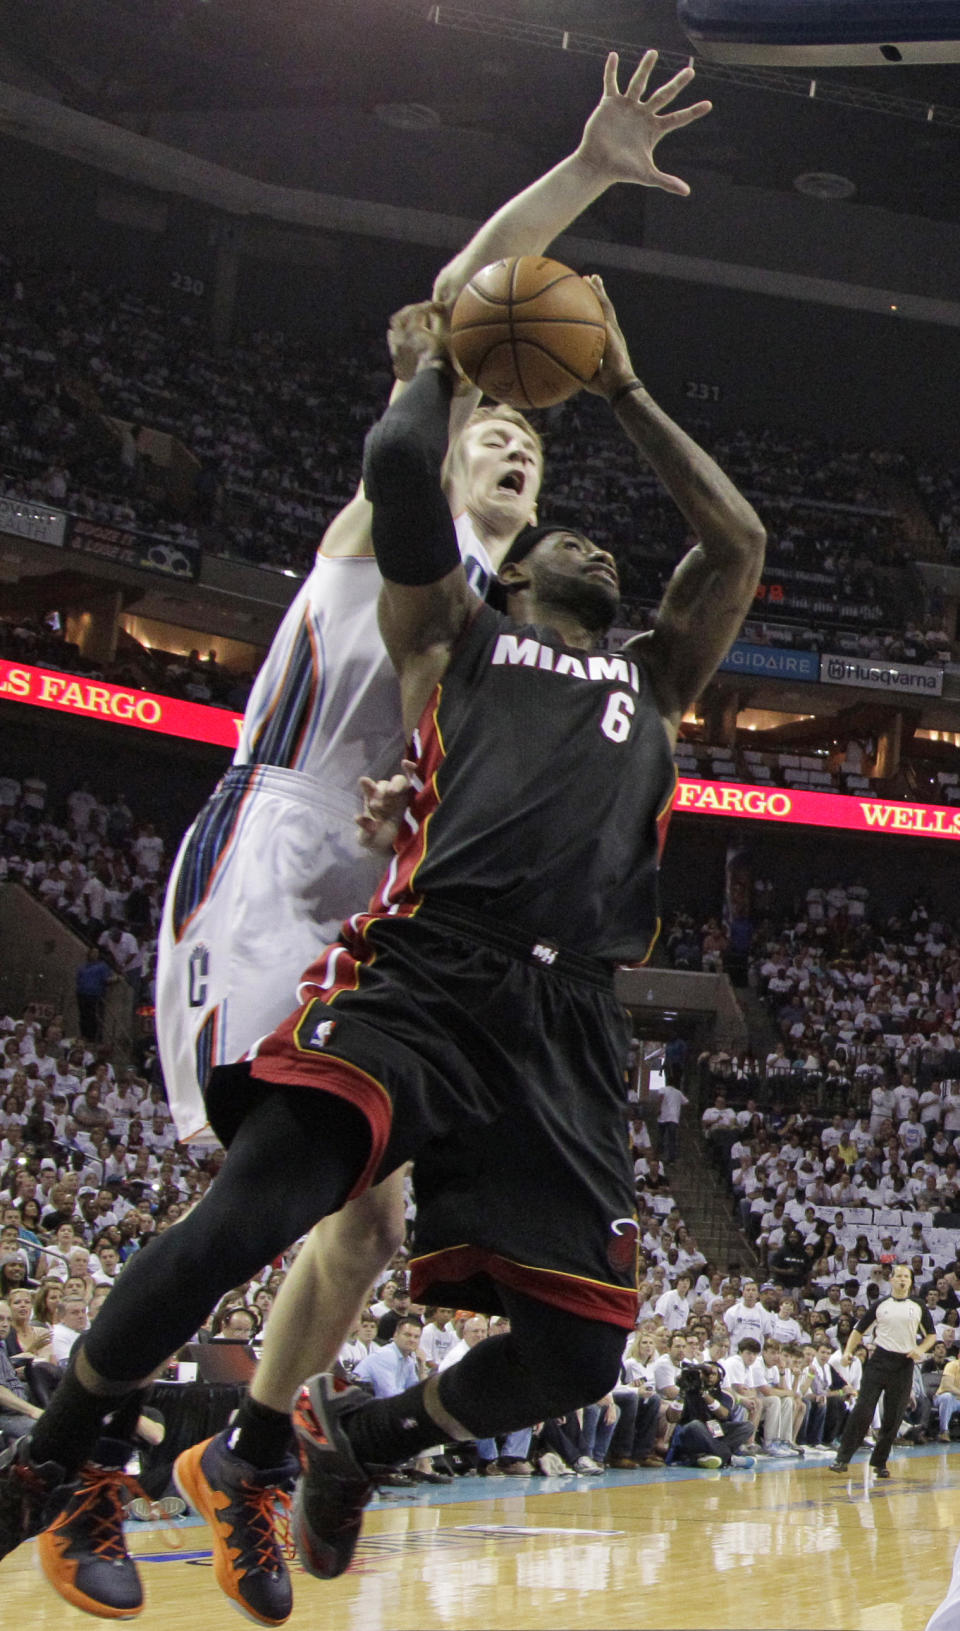 Charlotte Bobcats' Cody Zeller, back, goes up to block the shot of Miami Heat's LeBron James, front, during the first half in Game 3 of an opening-round NBA basketball playoff series in Charlotte, N.C., Saturday, April 26, 2014. (AP Photo/Chuck Burton)